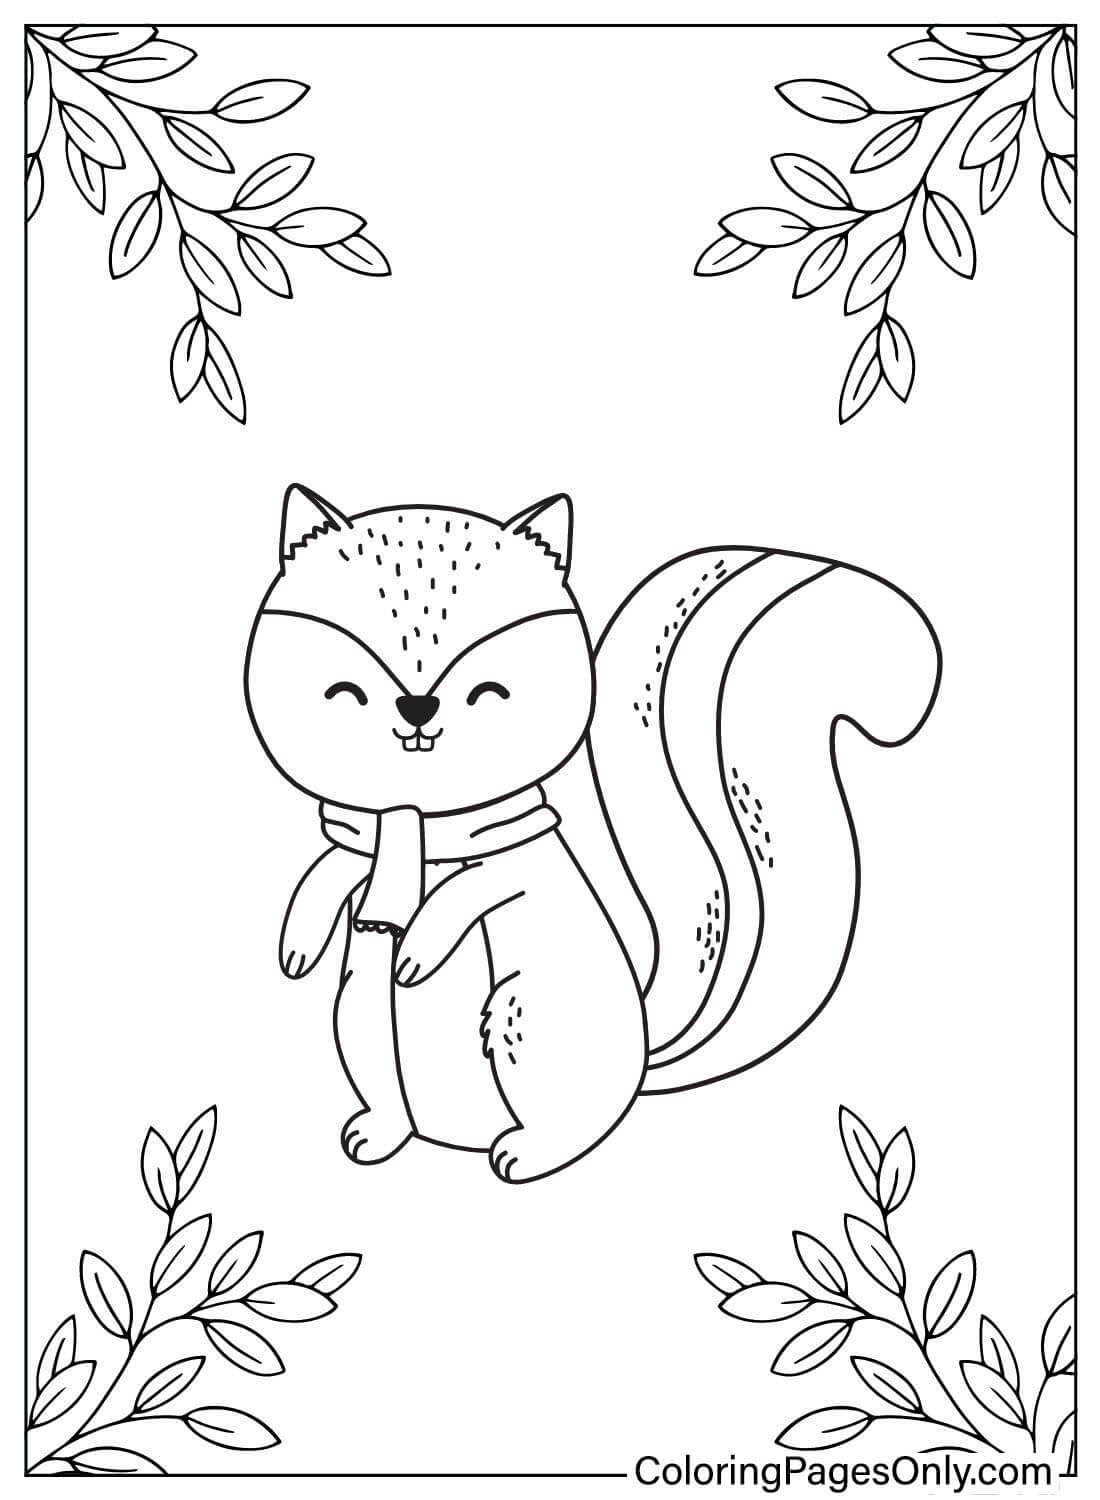 Chipmunk Free Coloring Page from Chipmunk